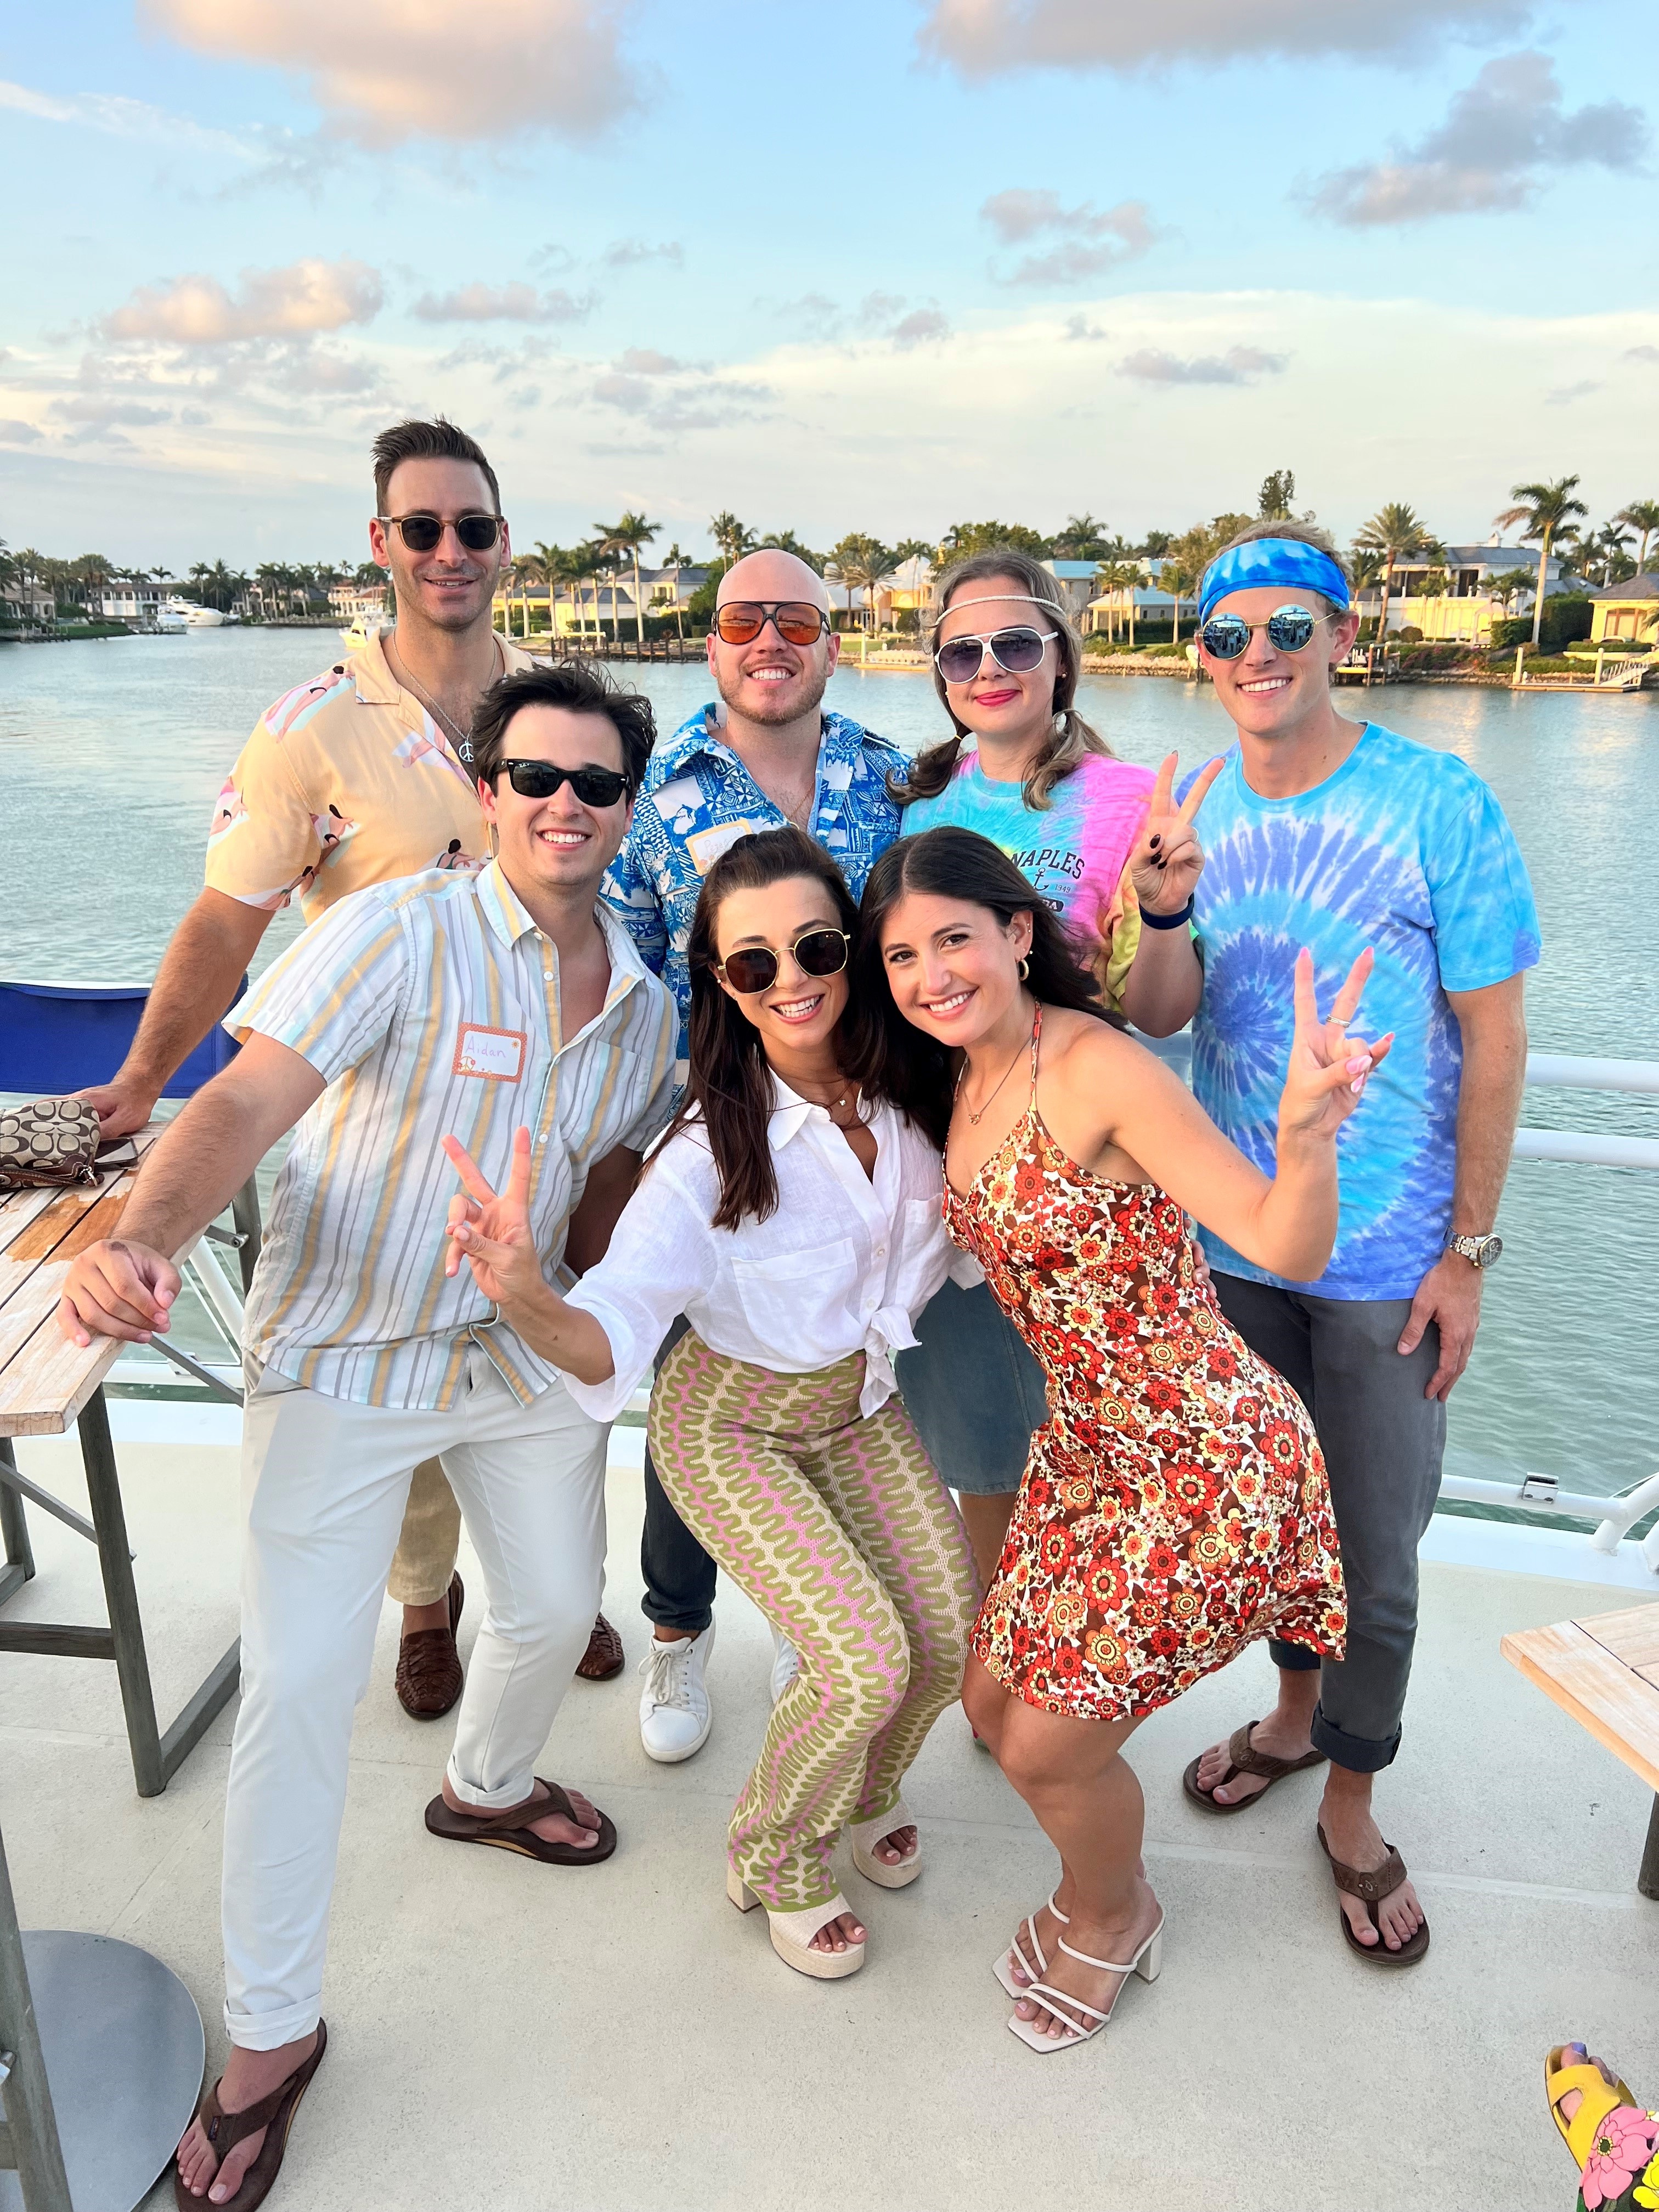 DLC Advocates to host the 11th Annual Sunset Cruise for Mental Health